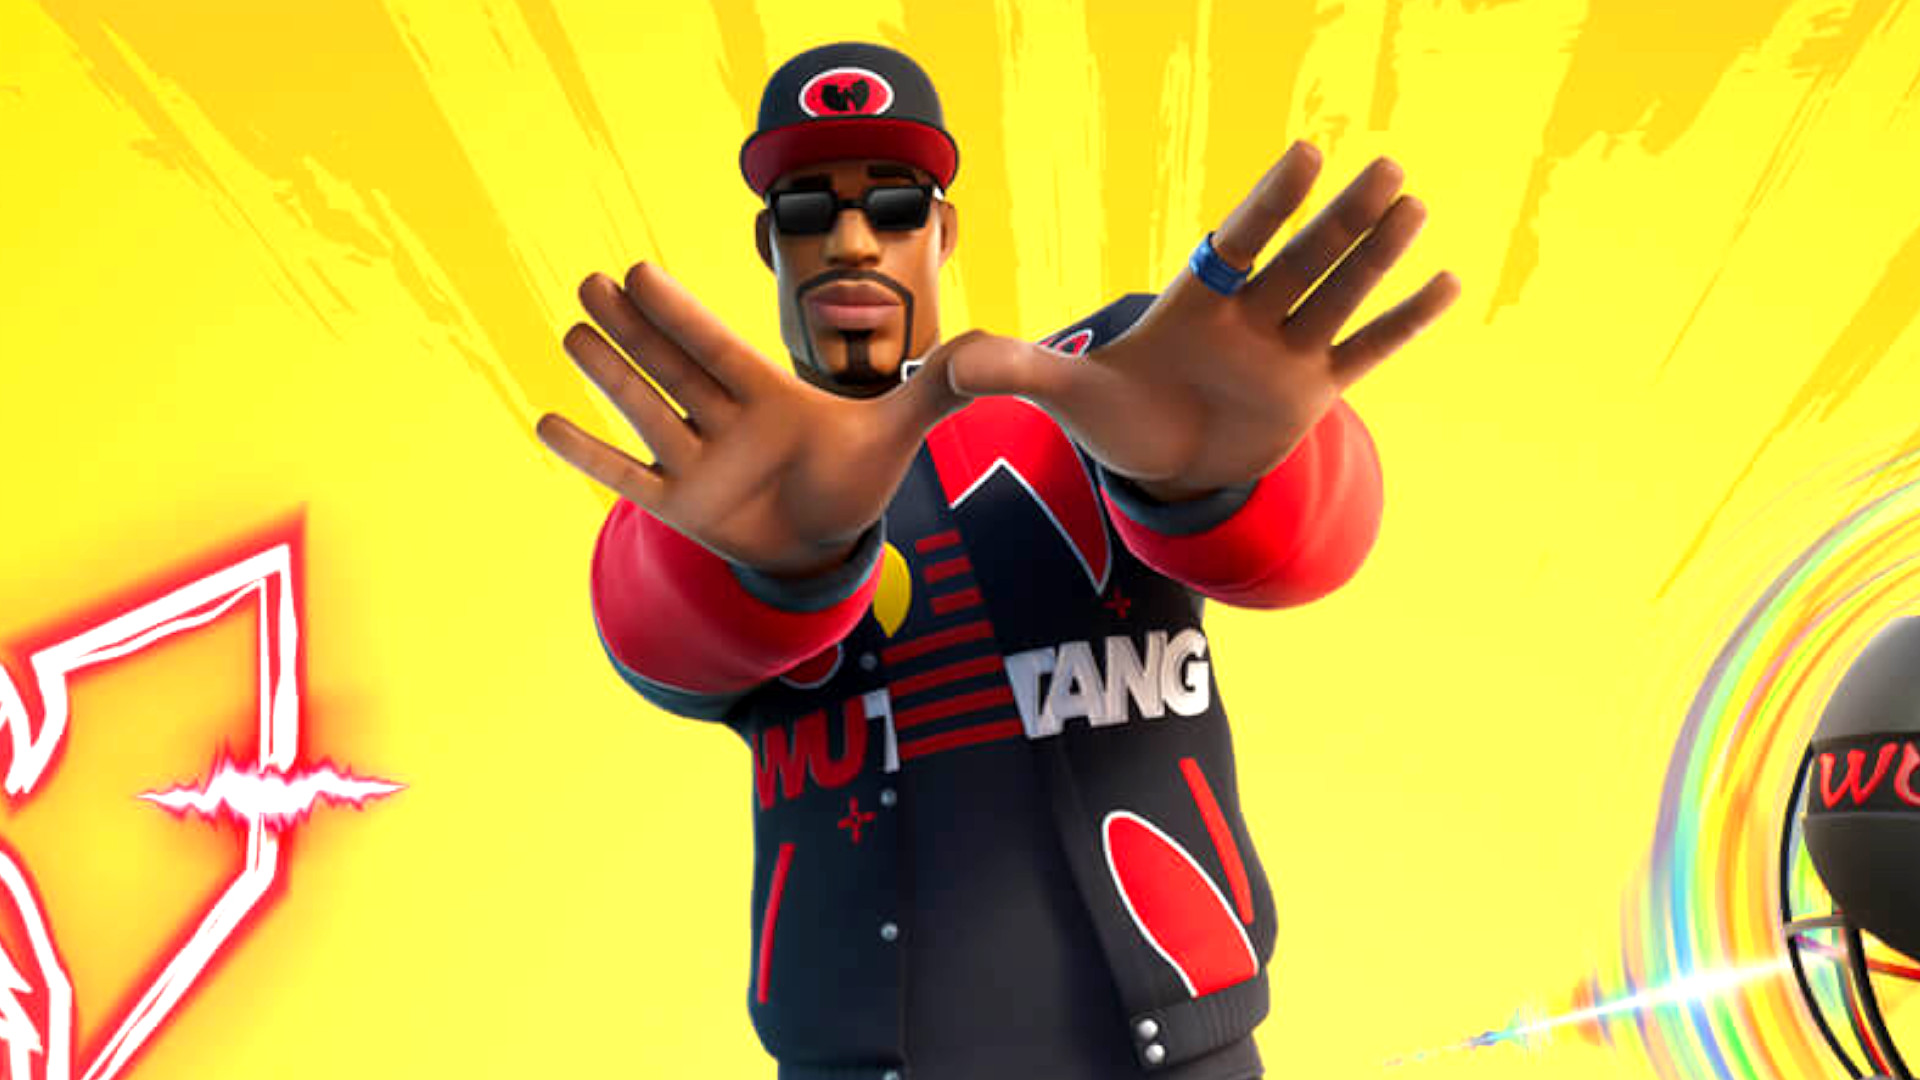 Wu-Tang is for the children who play Fortnite